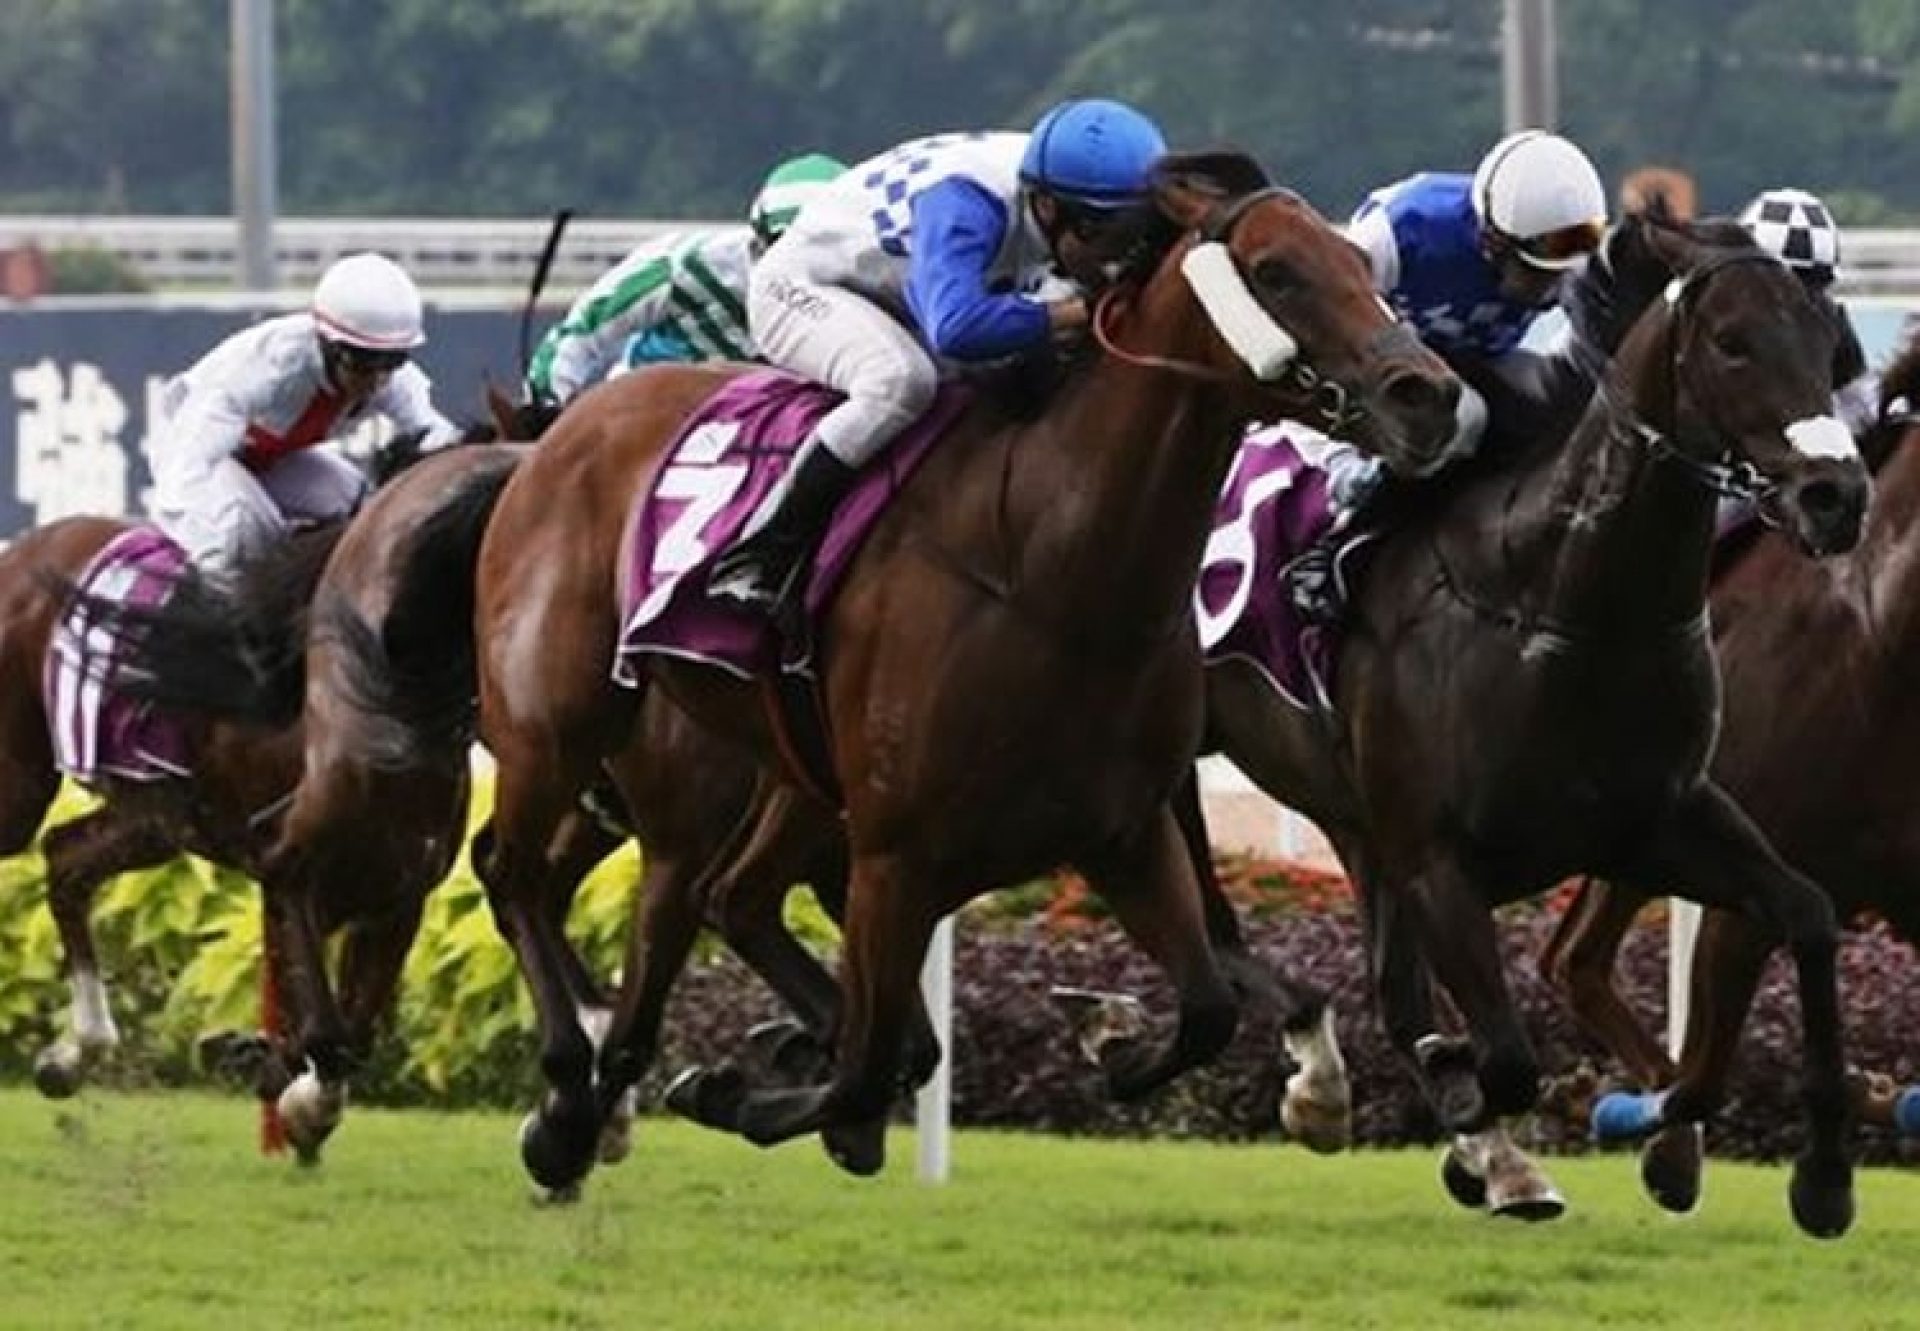 Elite Excalibur (Fastnet Rock) winning the G3 Committee’s Prize in SIngapore